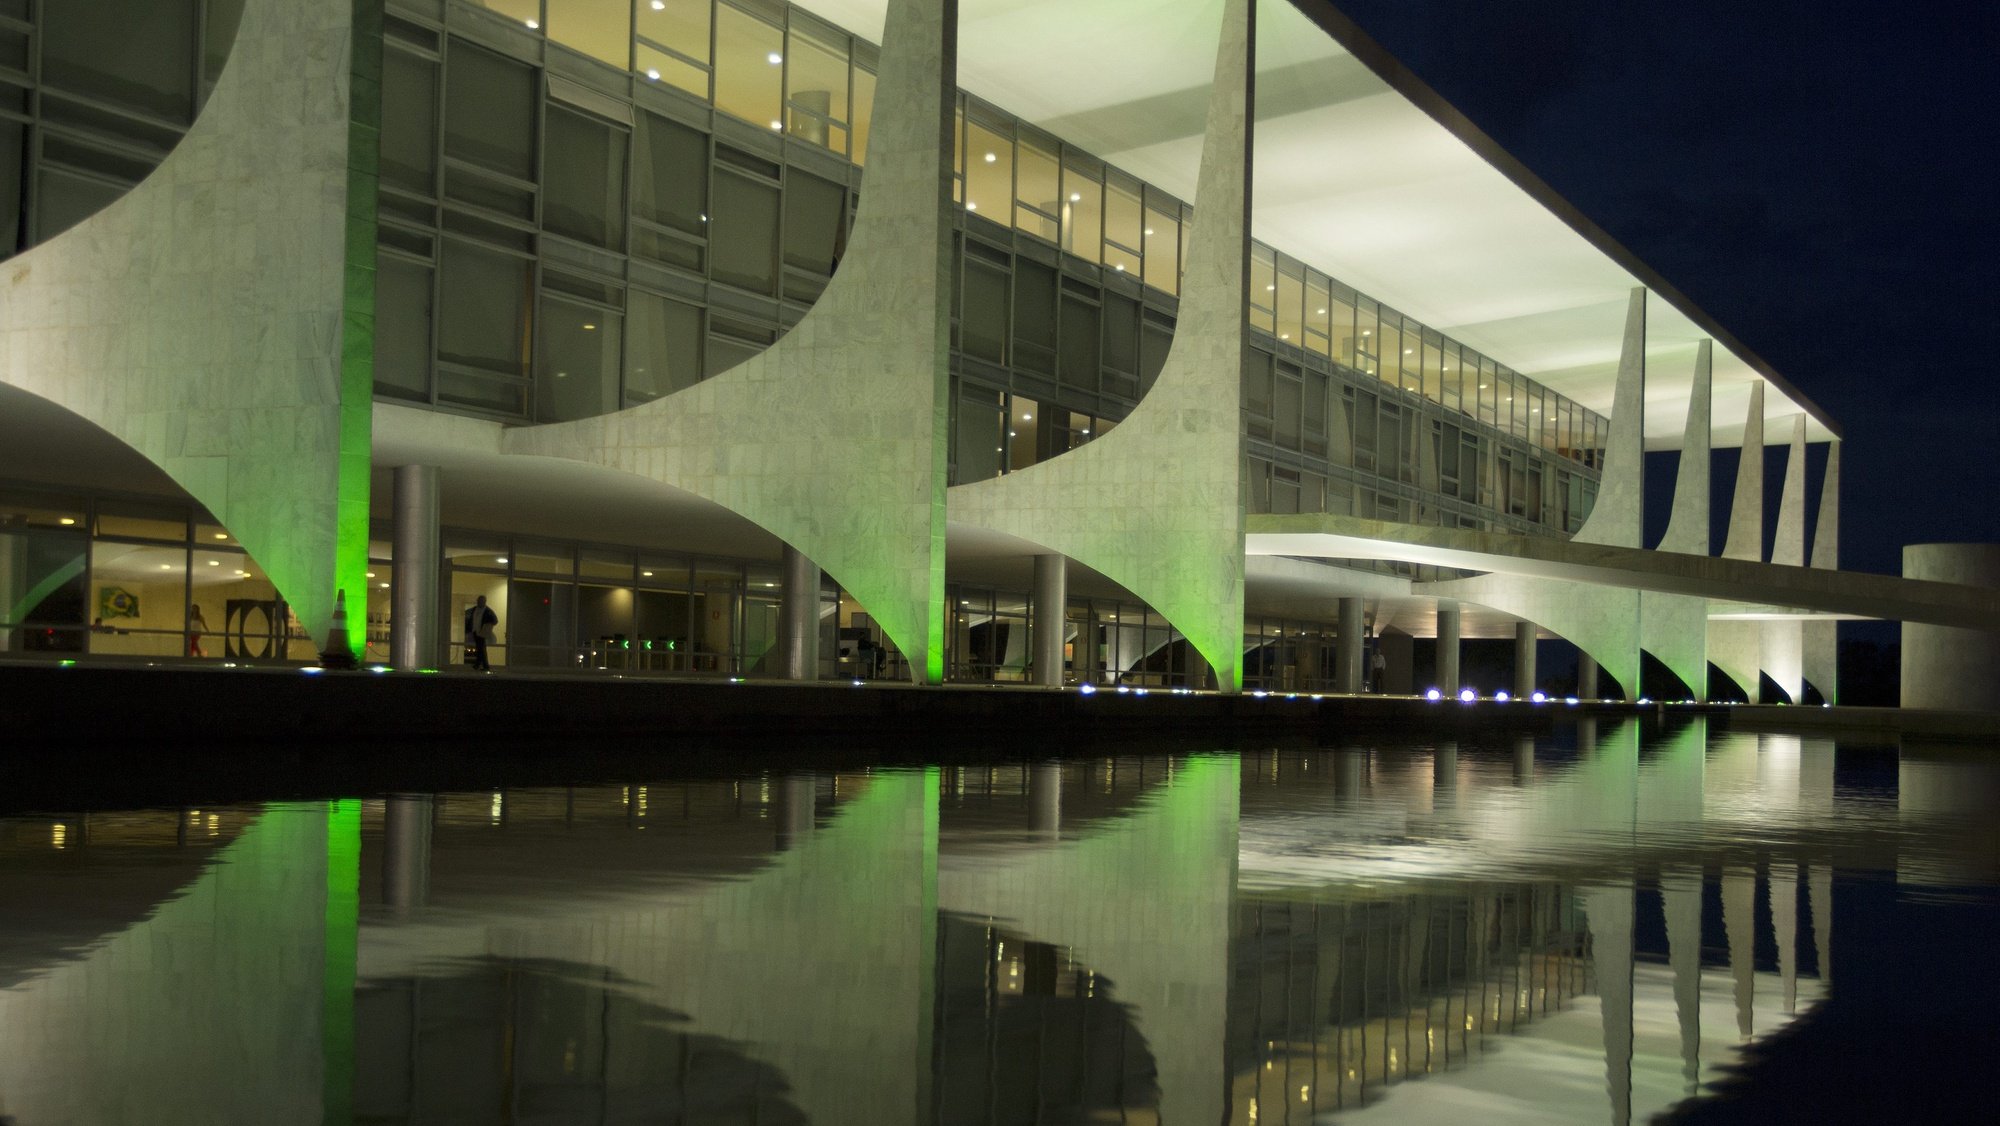 epa05654371 A general view of the Planalto Palace, Brazilian Government headquarters, lit in green in tribute of Chapecoense players who died in a plane accident, in Brasilia, Brazil, 30 November 2016. 71 people died when an aircraft crashed late 28 November 2016 with 77 people on board, including players of the Brazilian soccer club Chapecoense. The plane crashed in a mountainous area outside Medellin, Colombia as it was approaching the Jose Maria Cordoba airport. Chapecoense were scheduled to play in the Copa Sudamericana final against Medellin&#039;s Atletico Nacional on 30 November 2016.  EPA/Joédson Alves